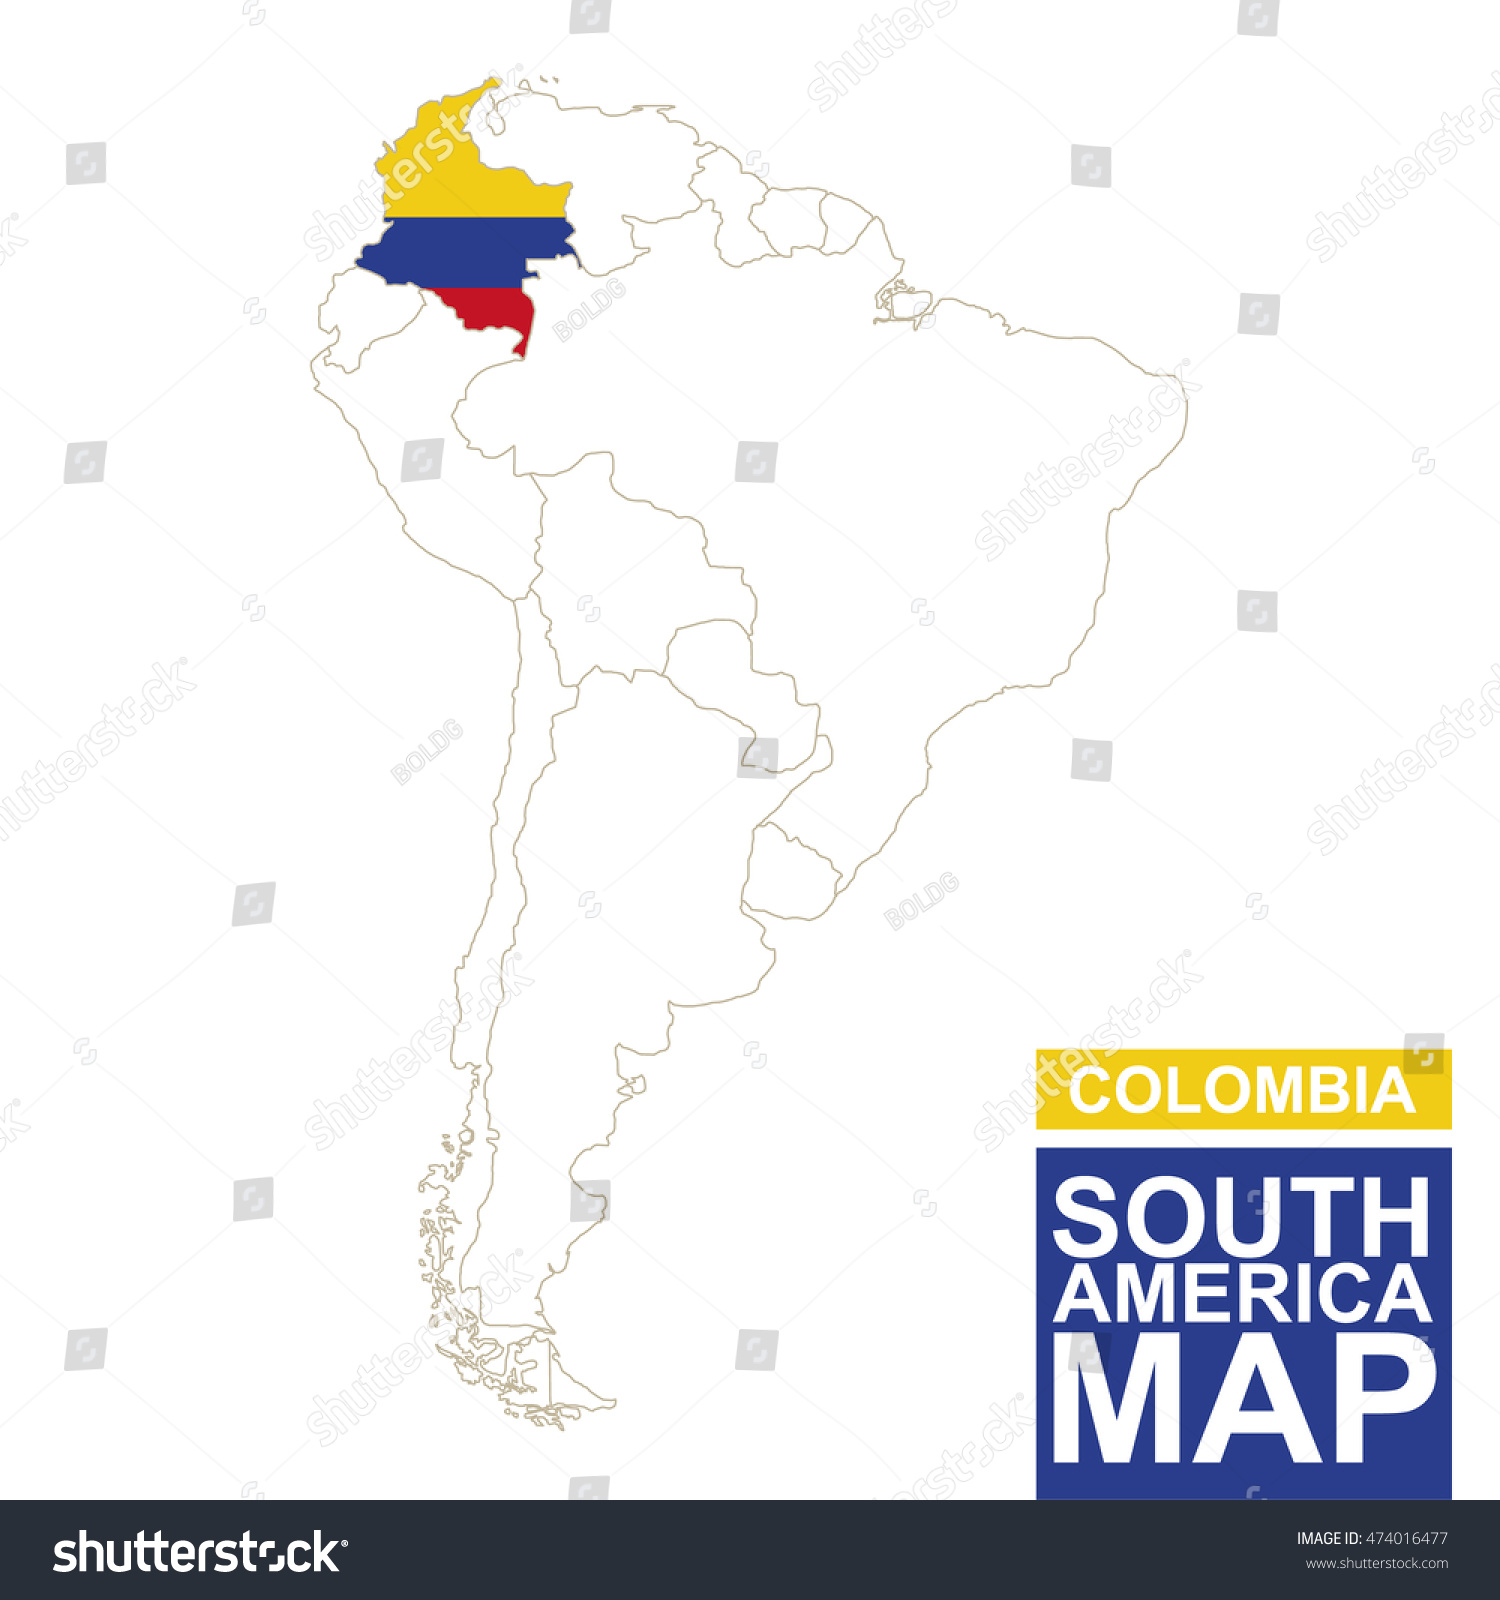 Colombia On A Map Of South America South America Contoured Map Highlighted Colombia Stock Illustration  474016477 | Shutterstock